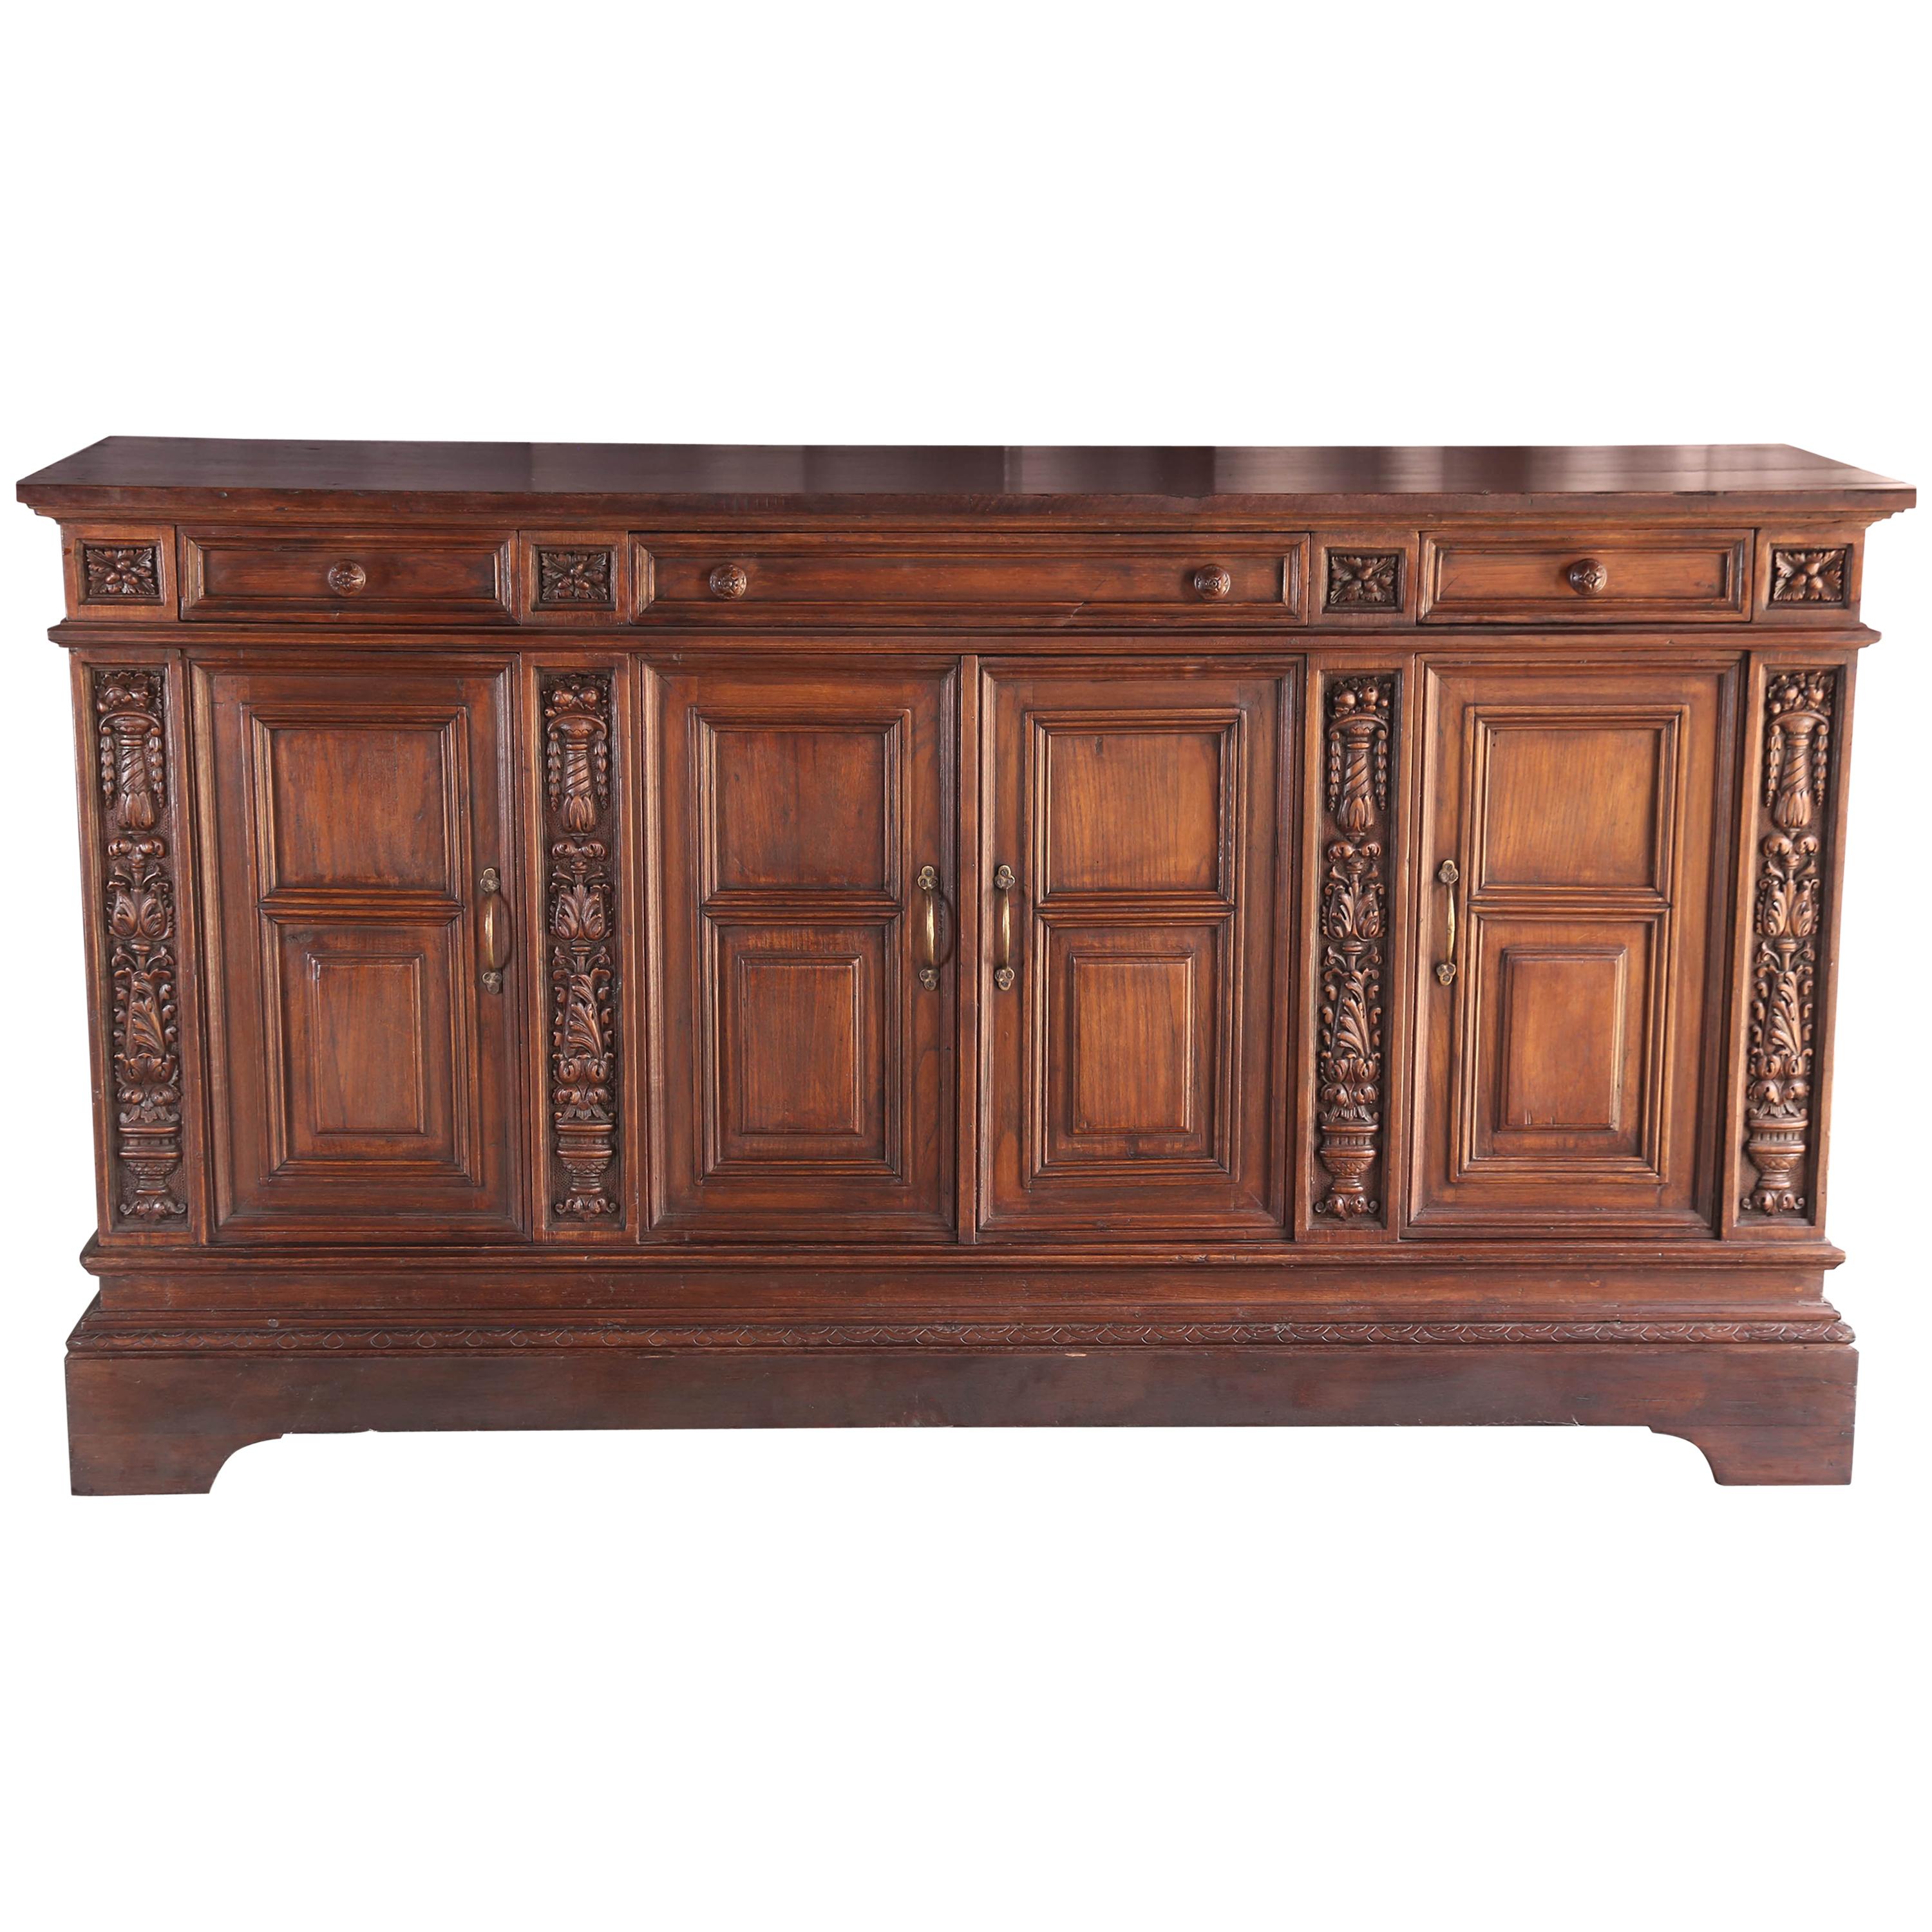 Late 19th Century Solid Teak Wood Superbly Handcrafted French Colonial Buffet For Sale